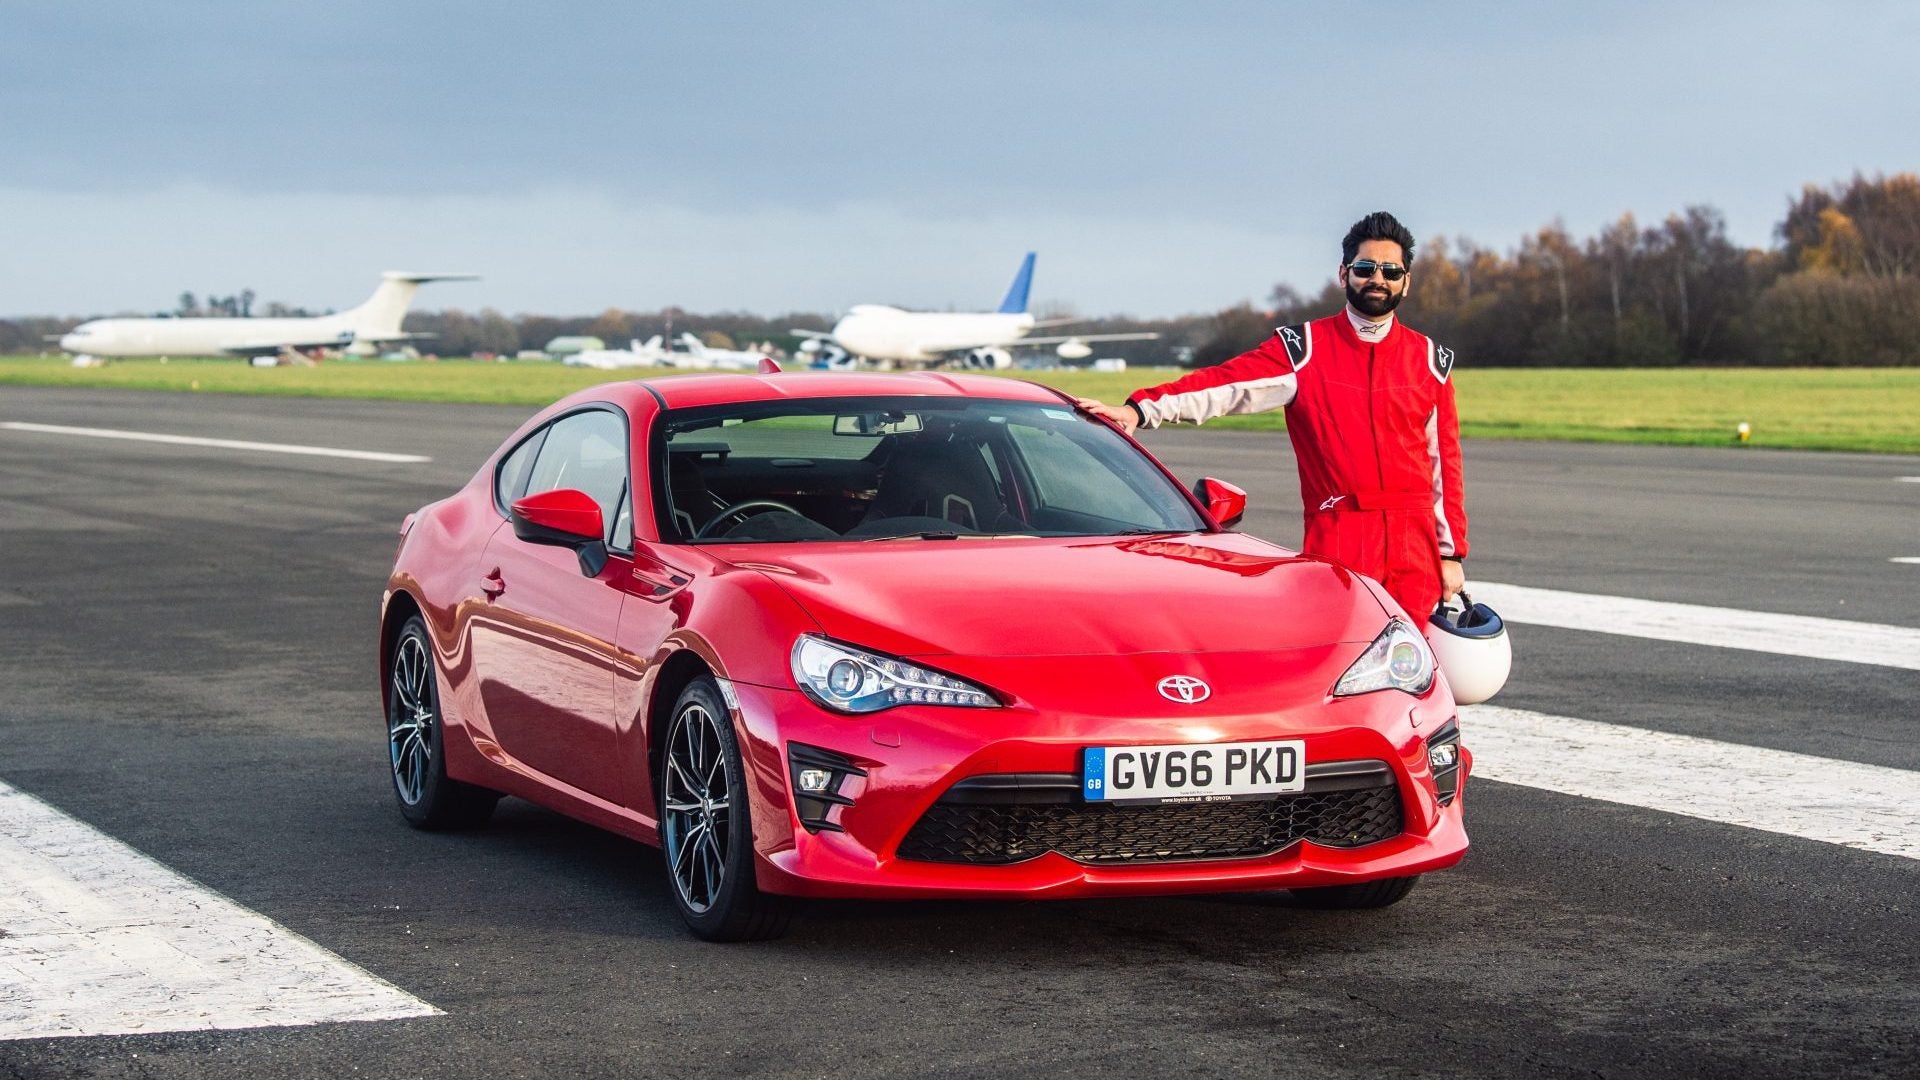 A Man Sets the Ninth-Fastest Lap Time in Top Gear's Reasonably Fast